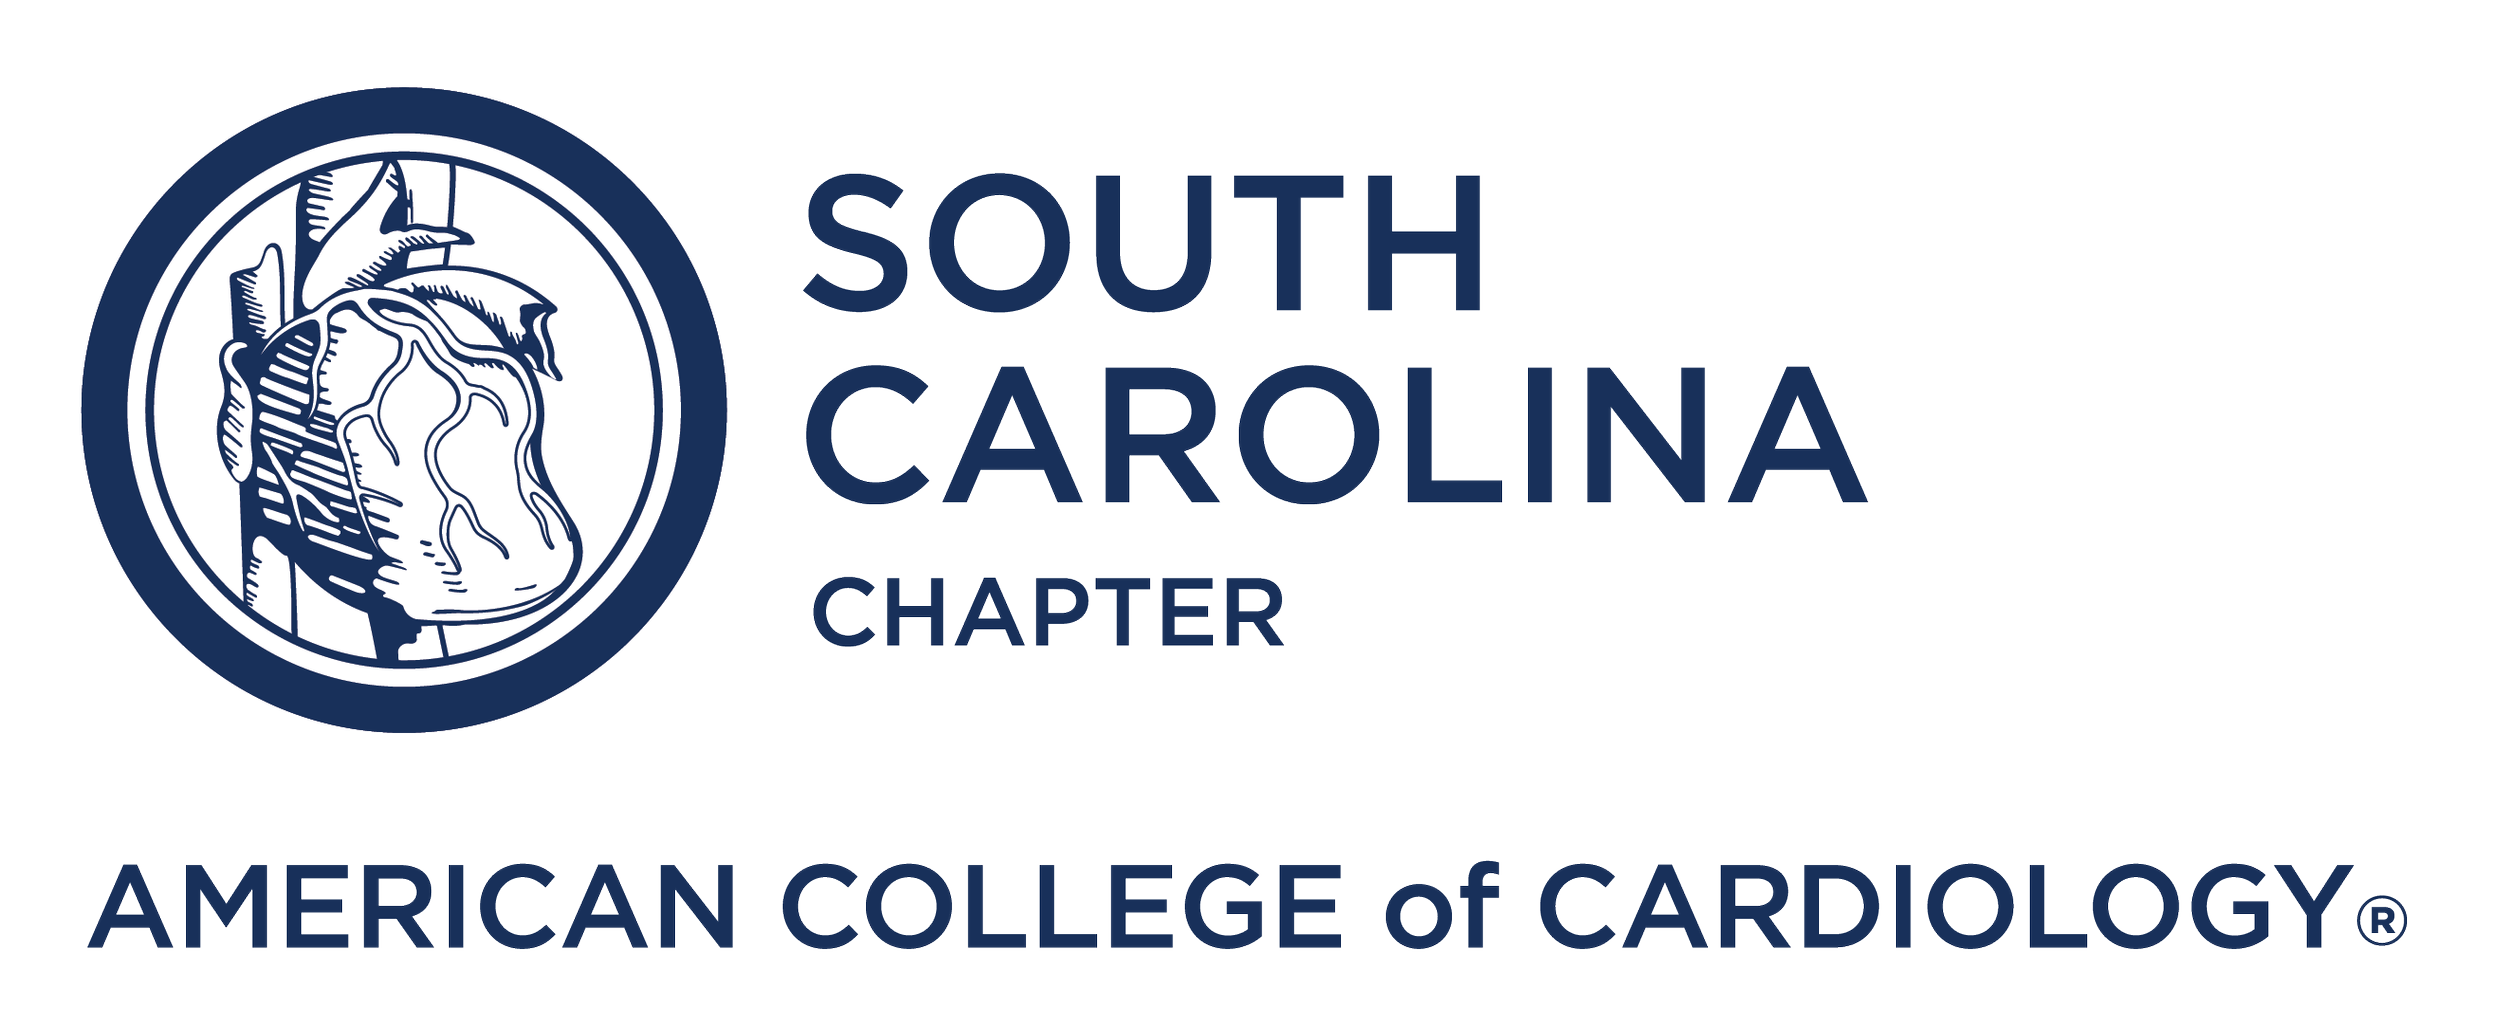 South Carolina - American College of Cardiology